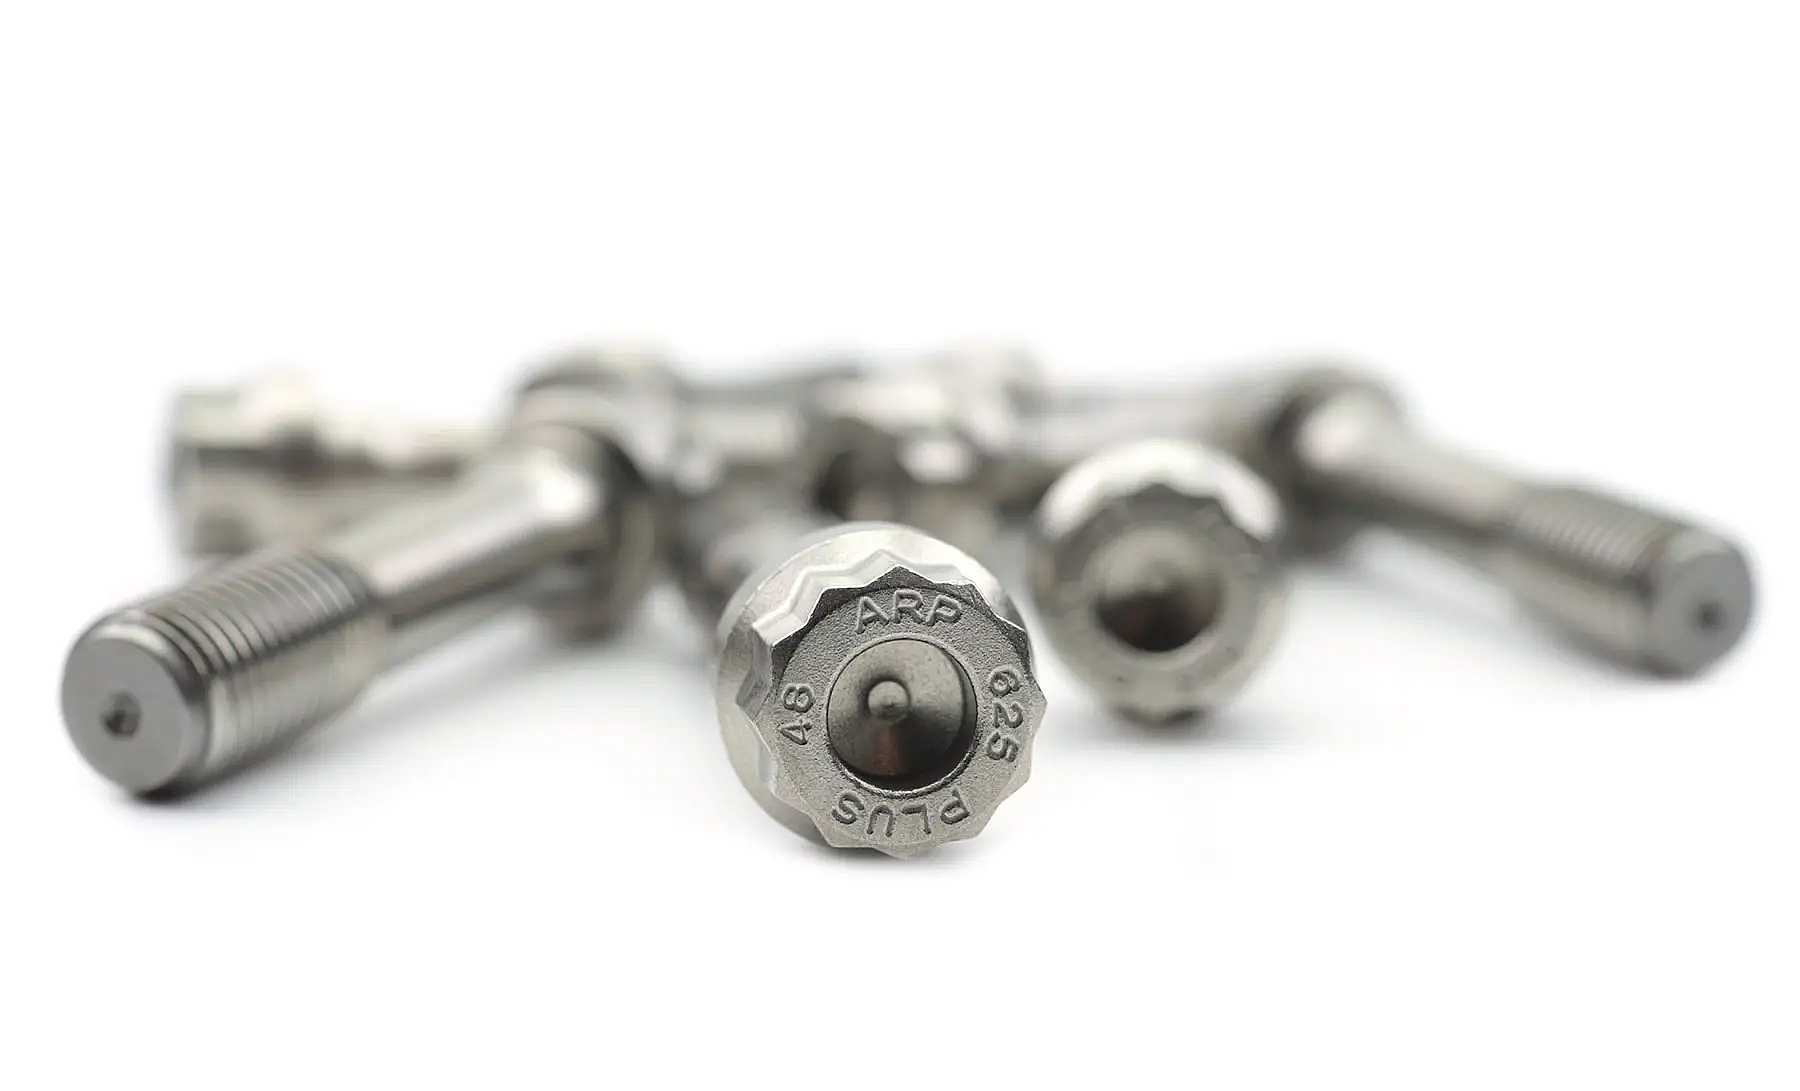 ARP Custom Age 625+ 3/8" Connection Bolts with 1.6" lenghts